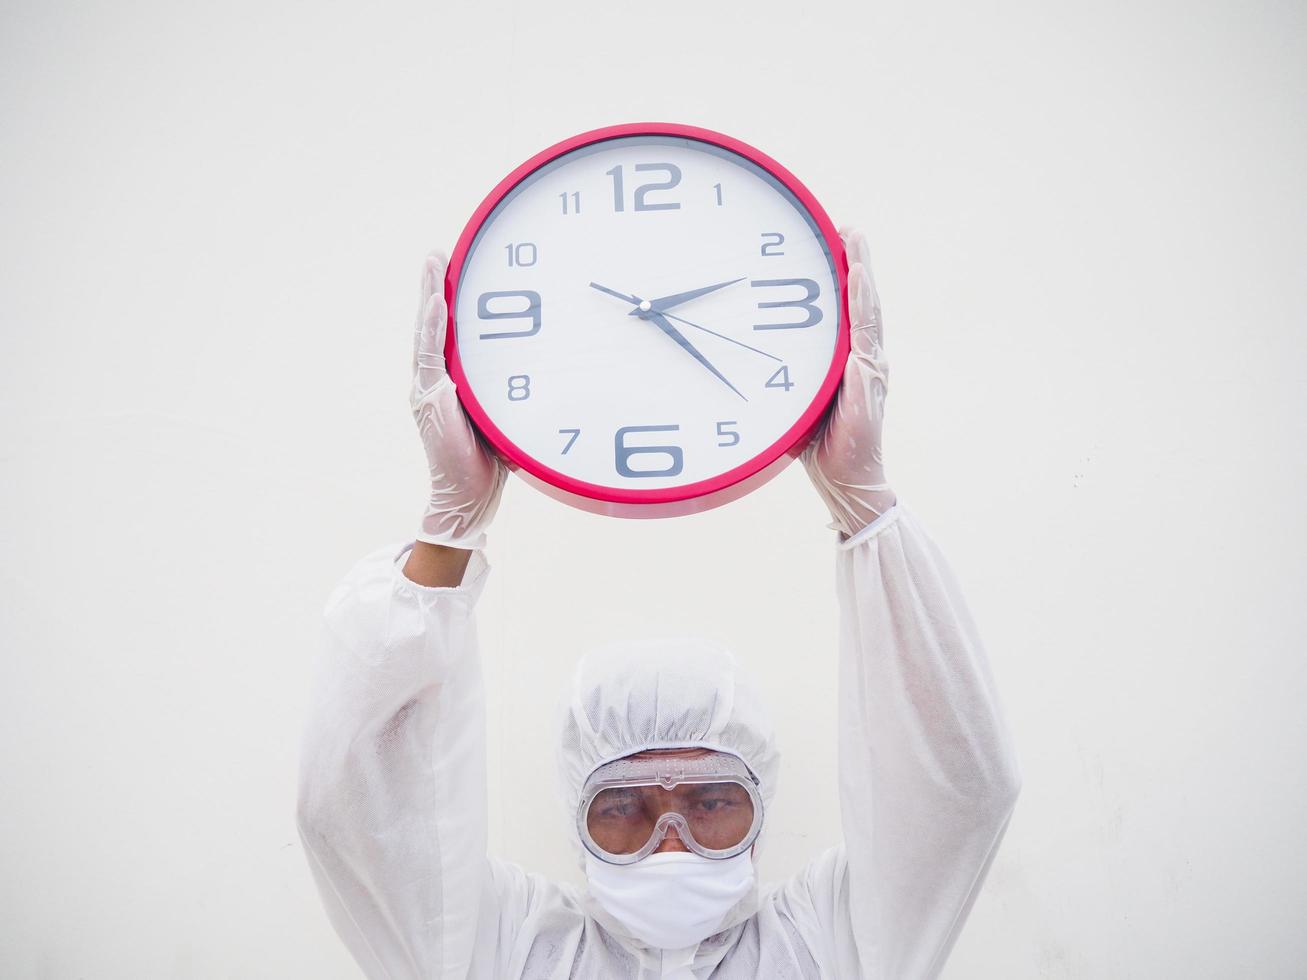 Portrait of doctor or scientist in PPE suite uniform holding red alarm clock and looking at the camera In various gestures. COVID-19 concept isolated white background photo